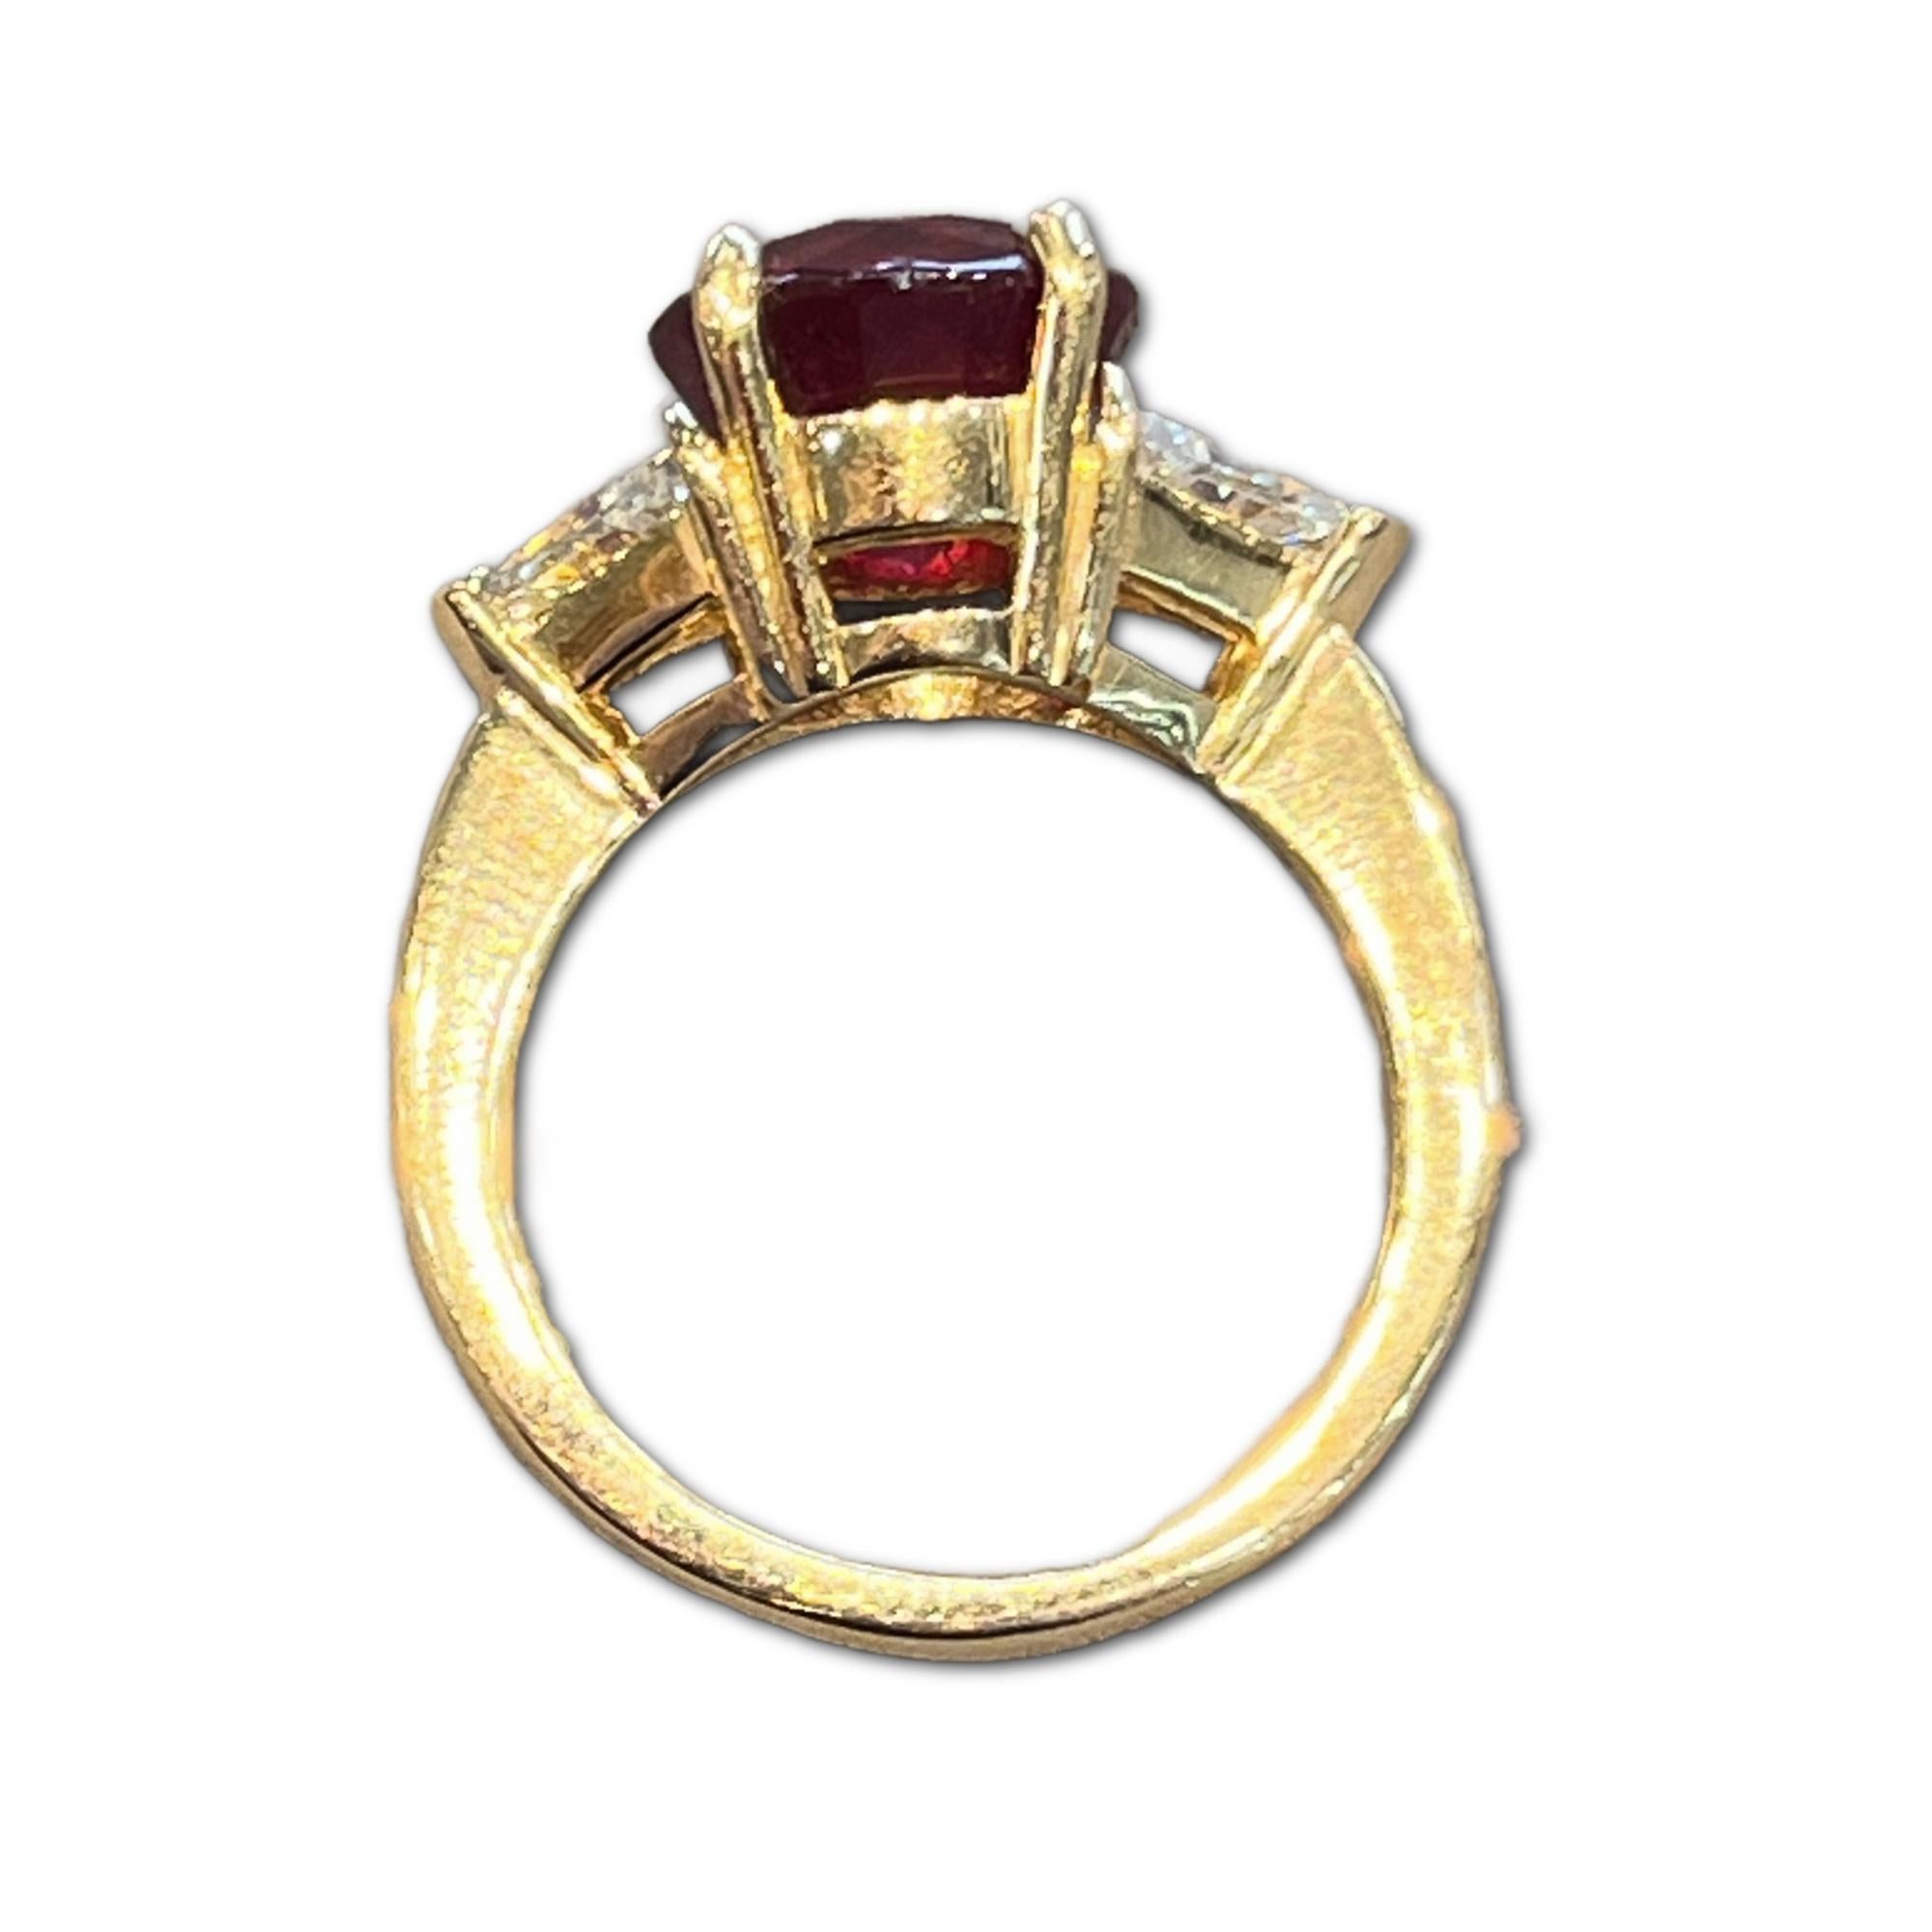 18k Yellow Gold Ruby & Diamond Lady's Three (3) Stone Ring. This Ring Contains One (1) Round Brilliant Cut Ruby Weighing 4.85cts in Total Carat Weight. This Stone Measures Approximately 9.4mm x 9.4mm x 6.5mm. This Stone is Deep Vibrant Red in Color.